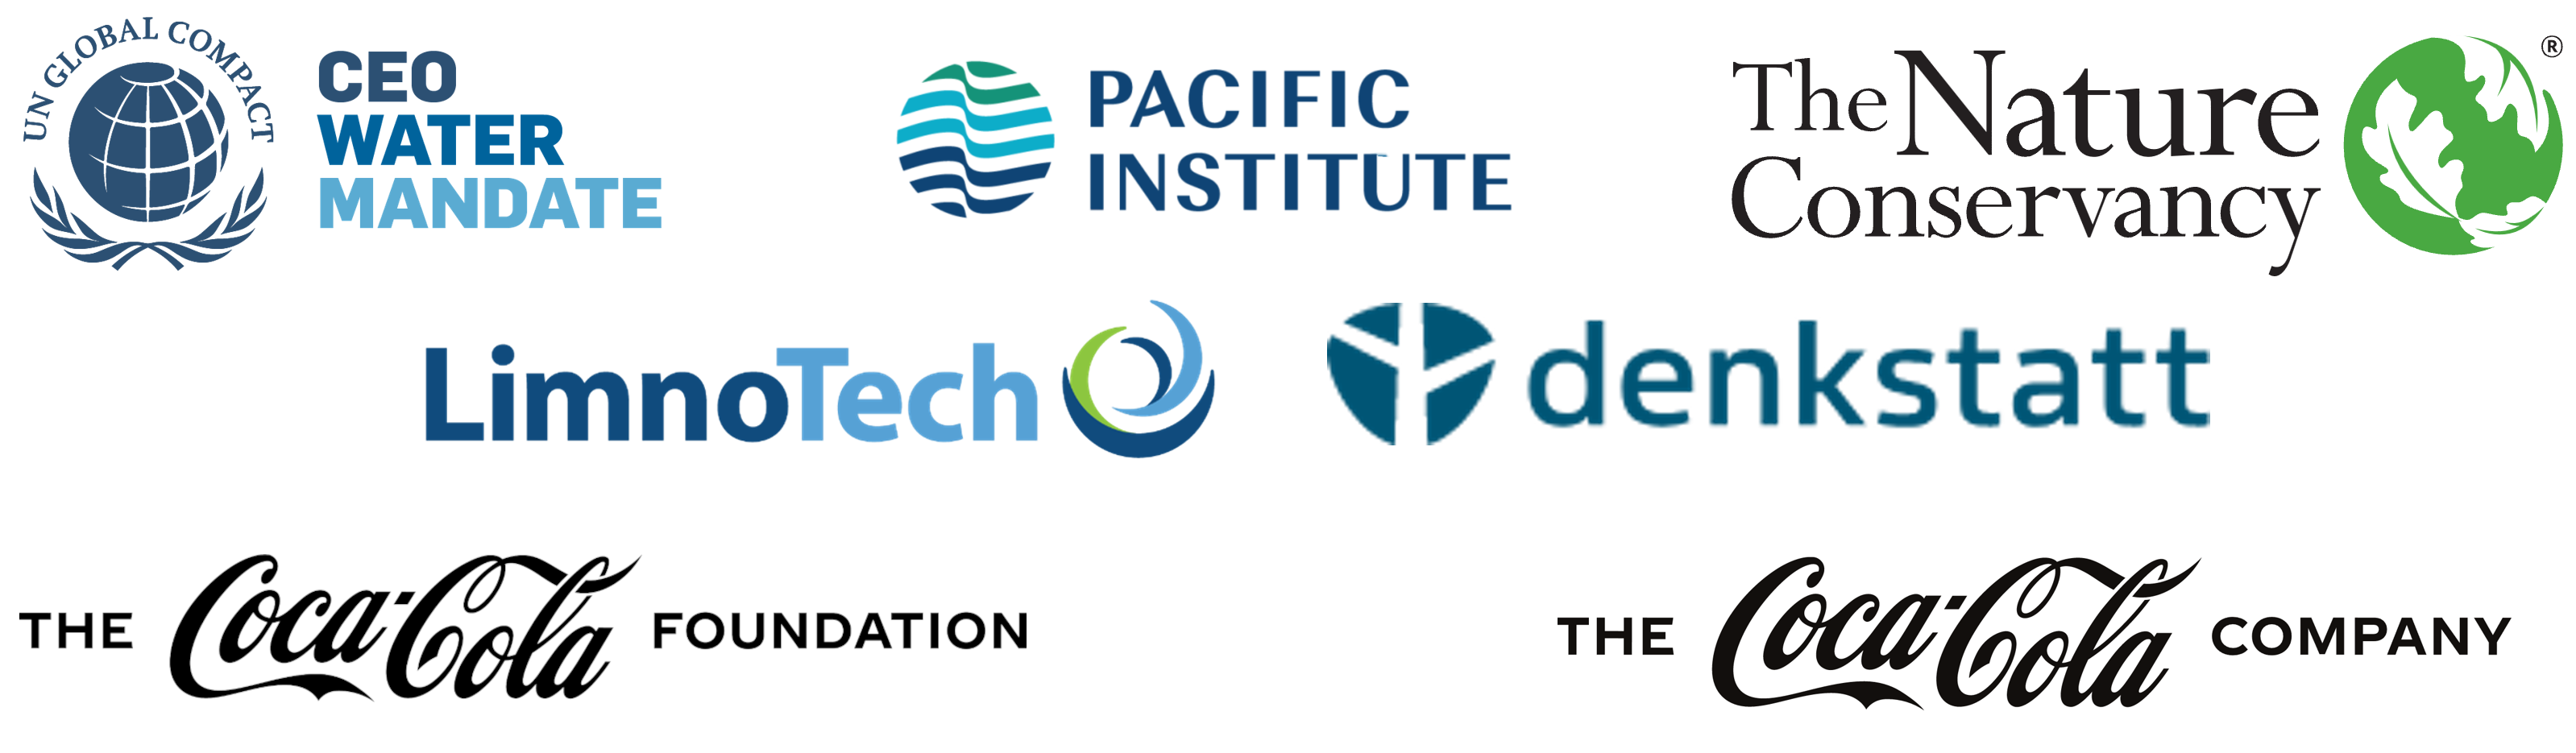 Logos of Partner Organizations: CEO Water Mandate, the Coca Cola Company, denkstatt, LimnoTech, Pacific Institute, and the Nature Conservancy